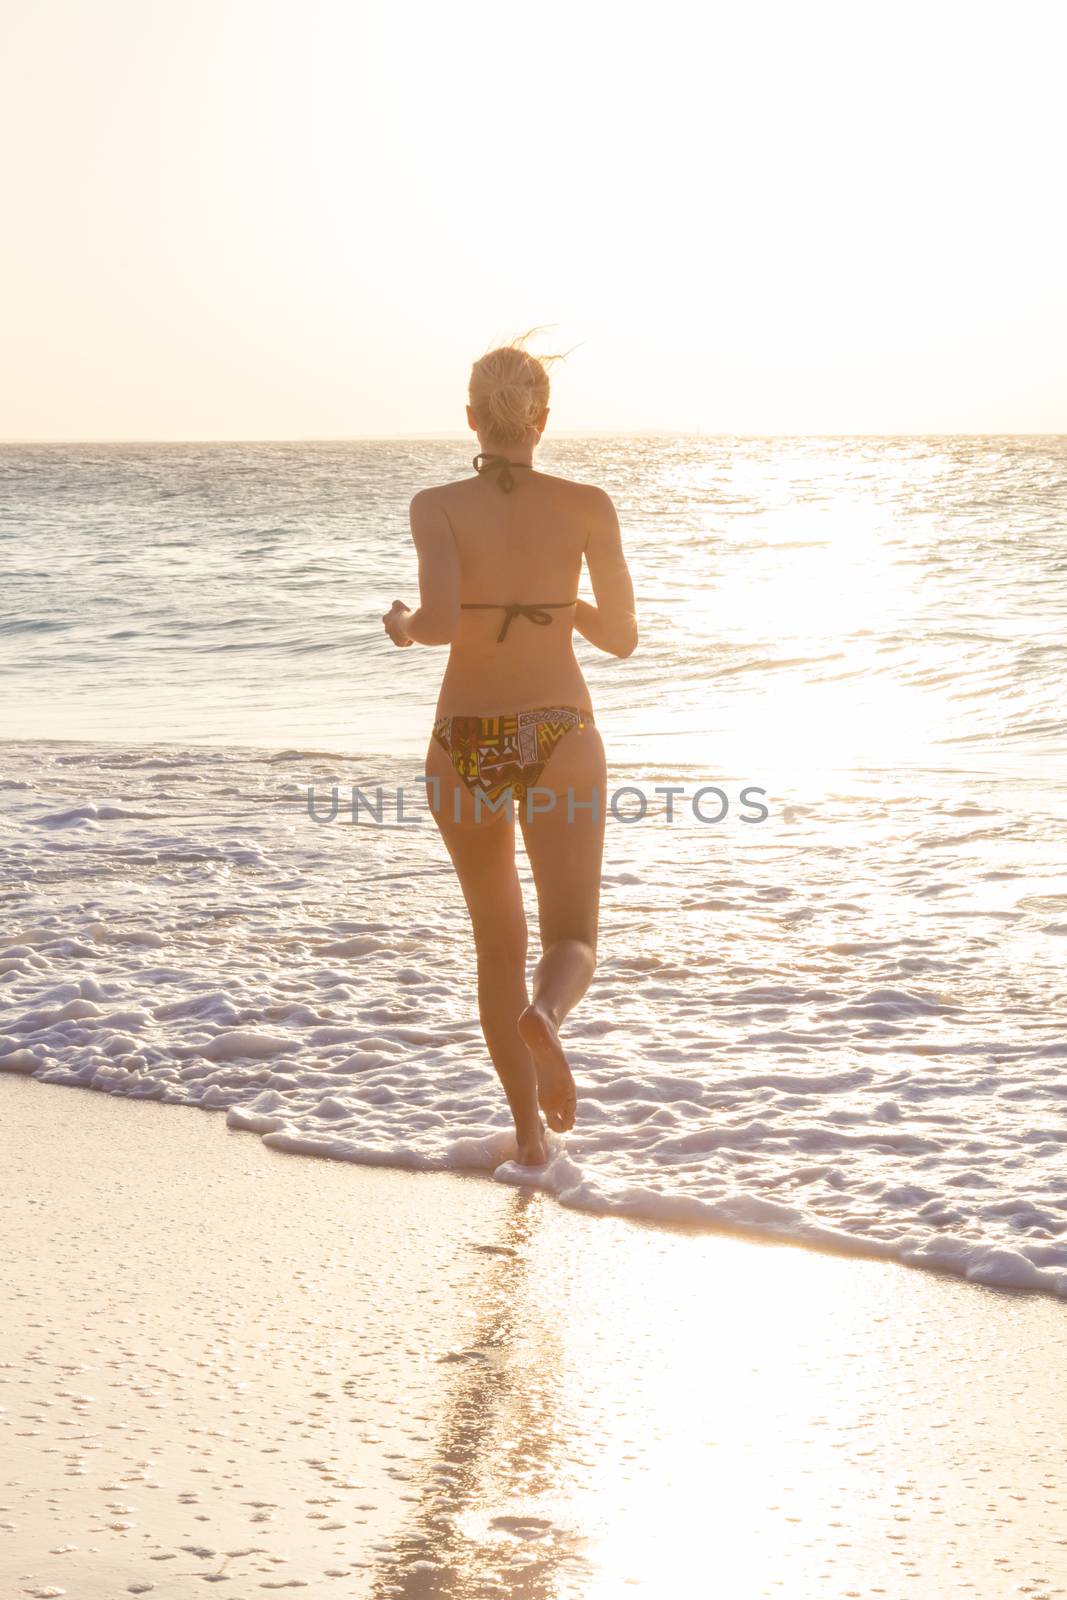 Woman running on the beach in sunset. by kasto